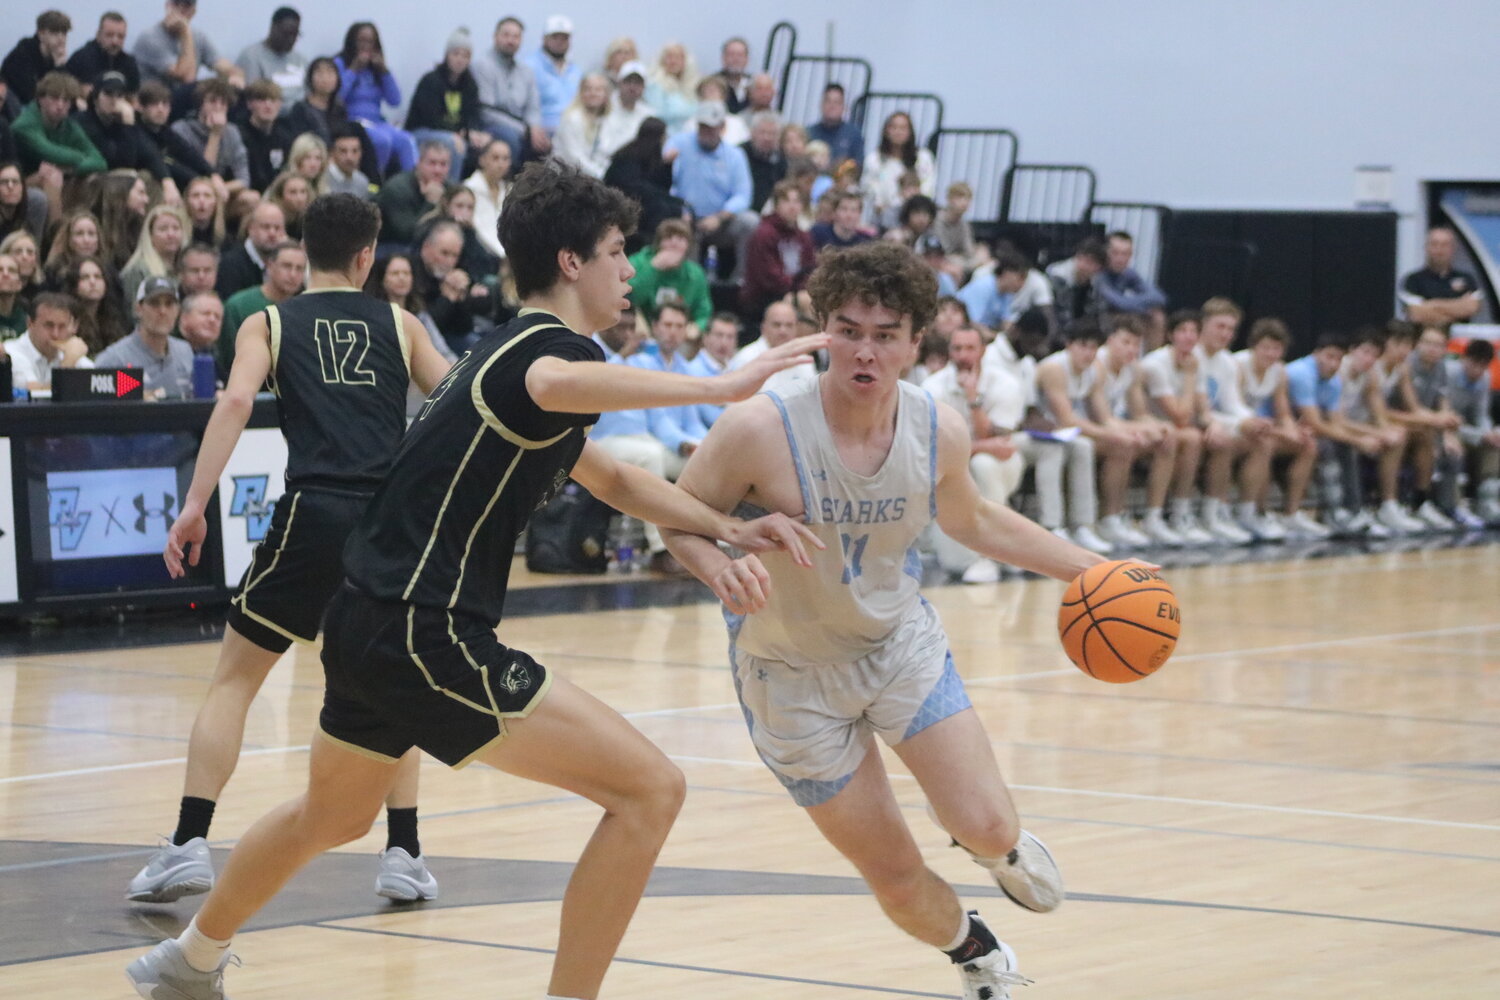 The Sharks and Panthers will meet in a boys basketball showdown at Nease High to end the regular season on Feb. 2 at 7:30 p.m.